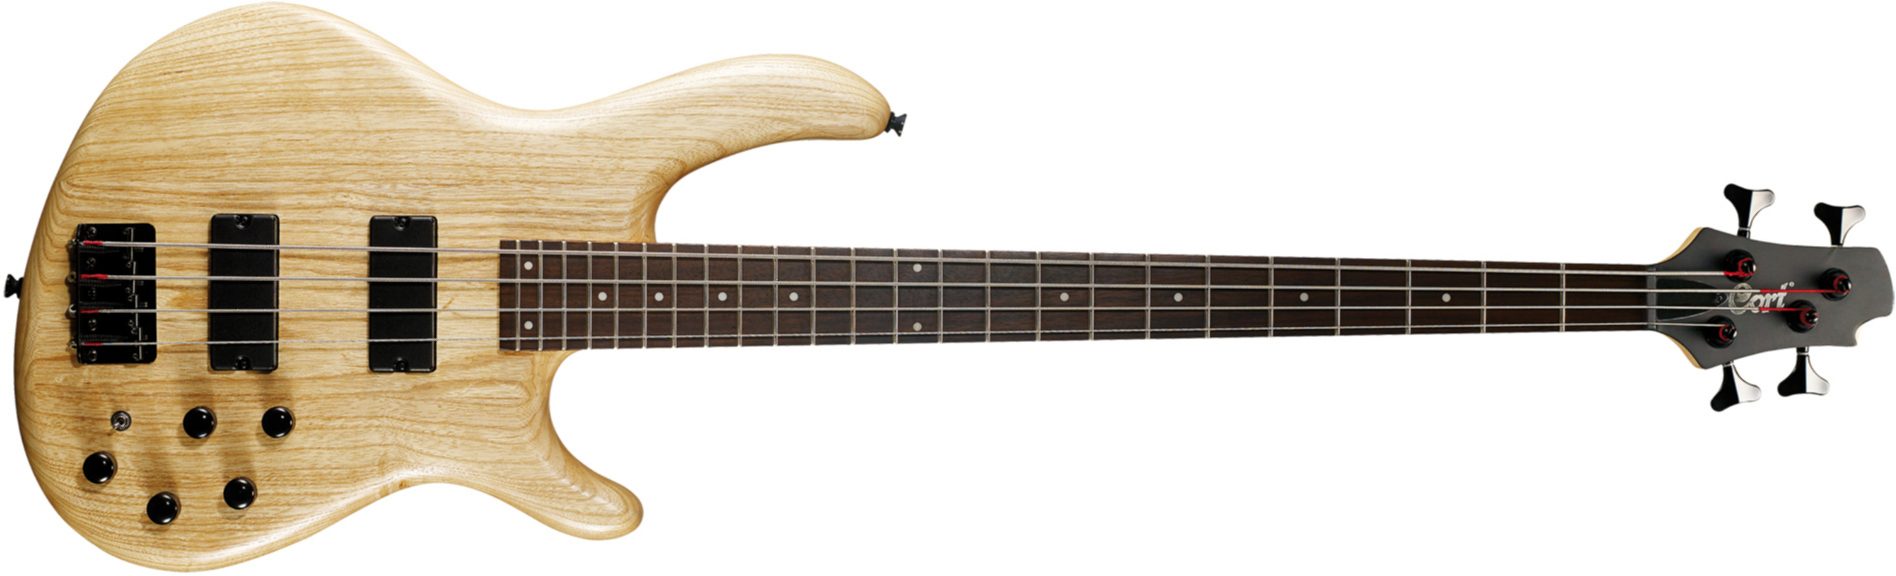 Cort Action Dlx As Opn Ash Rw - Natural Open Pore - Solidbody E-bass - Main picture